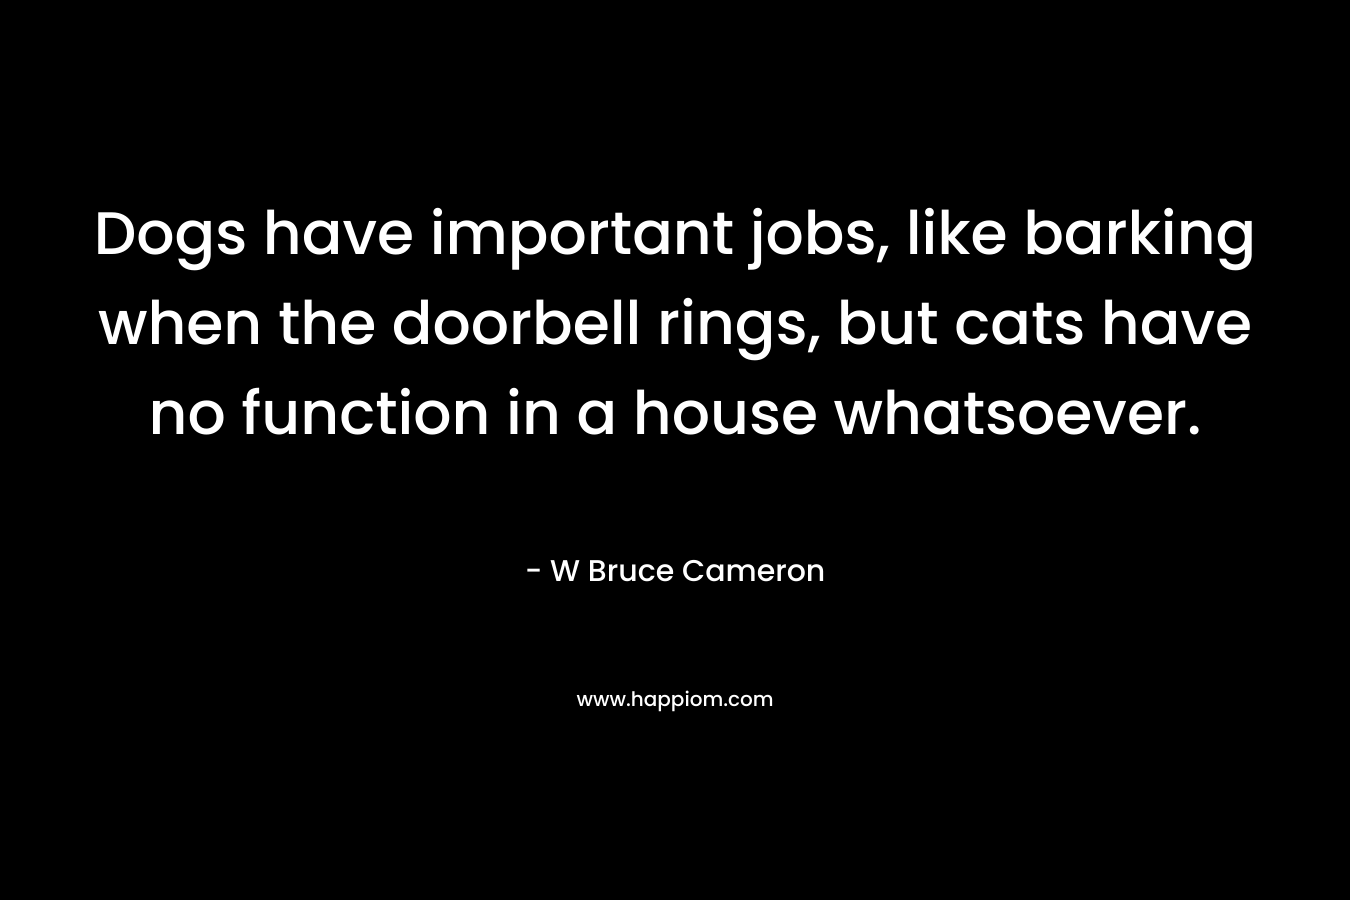 Dogs have important jobs, like barking when the doorbell rings, but cats have no function in a house whatsoever. – W Bruce Cameron